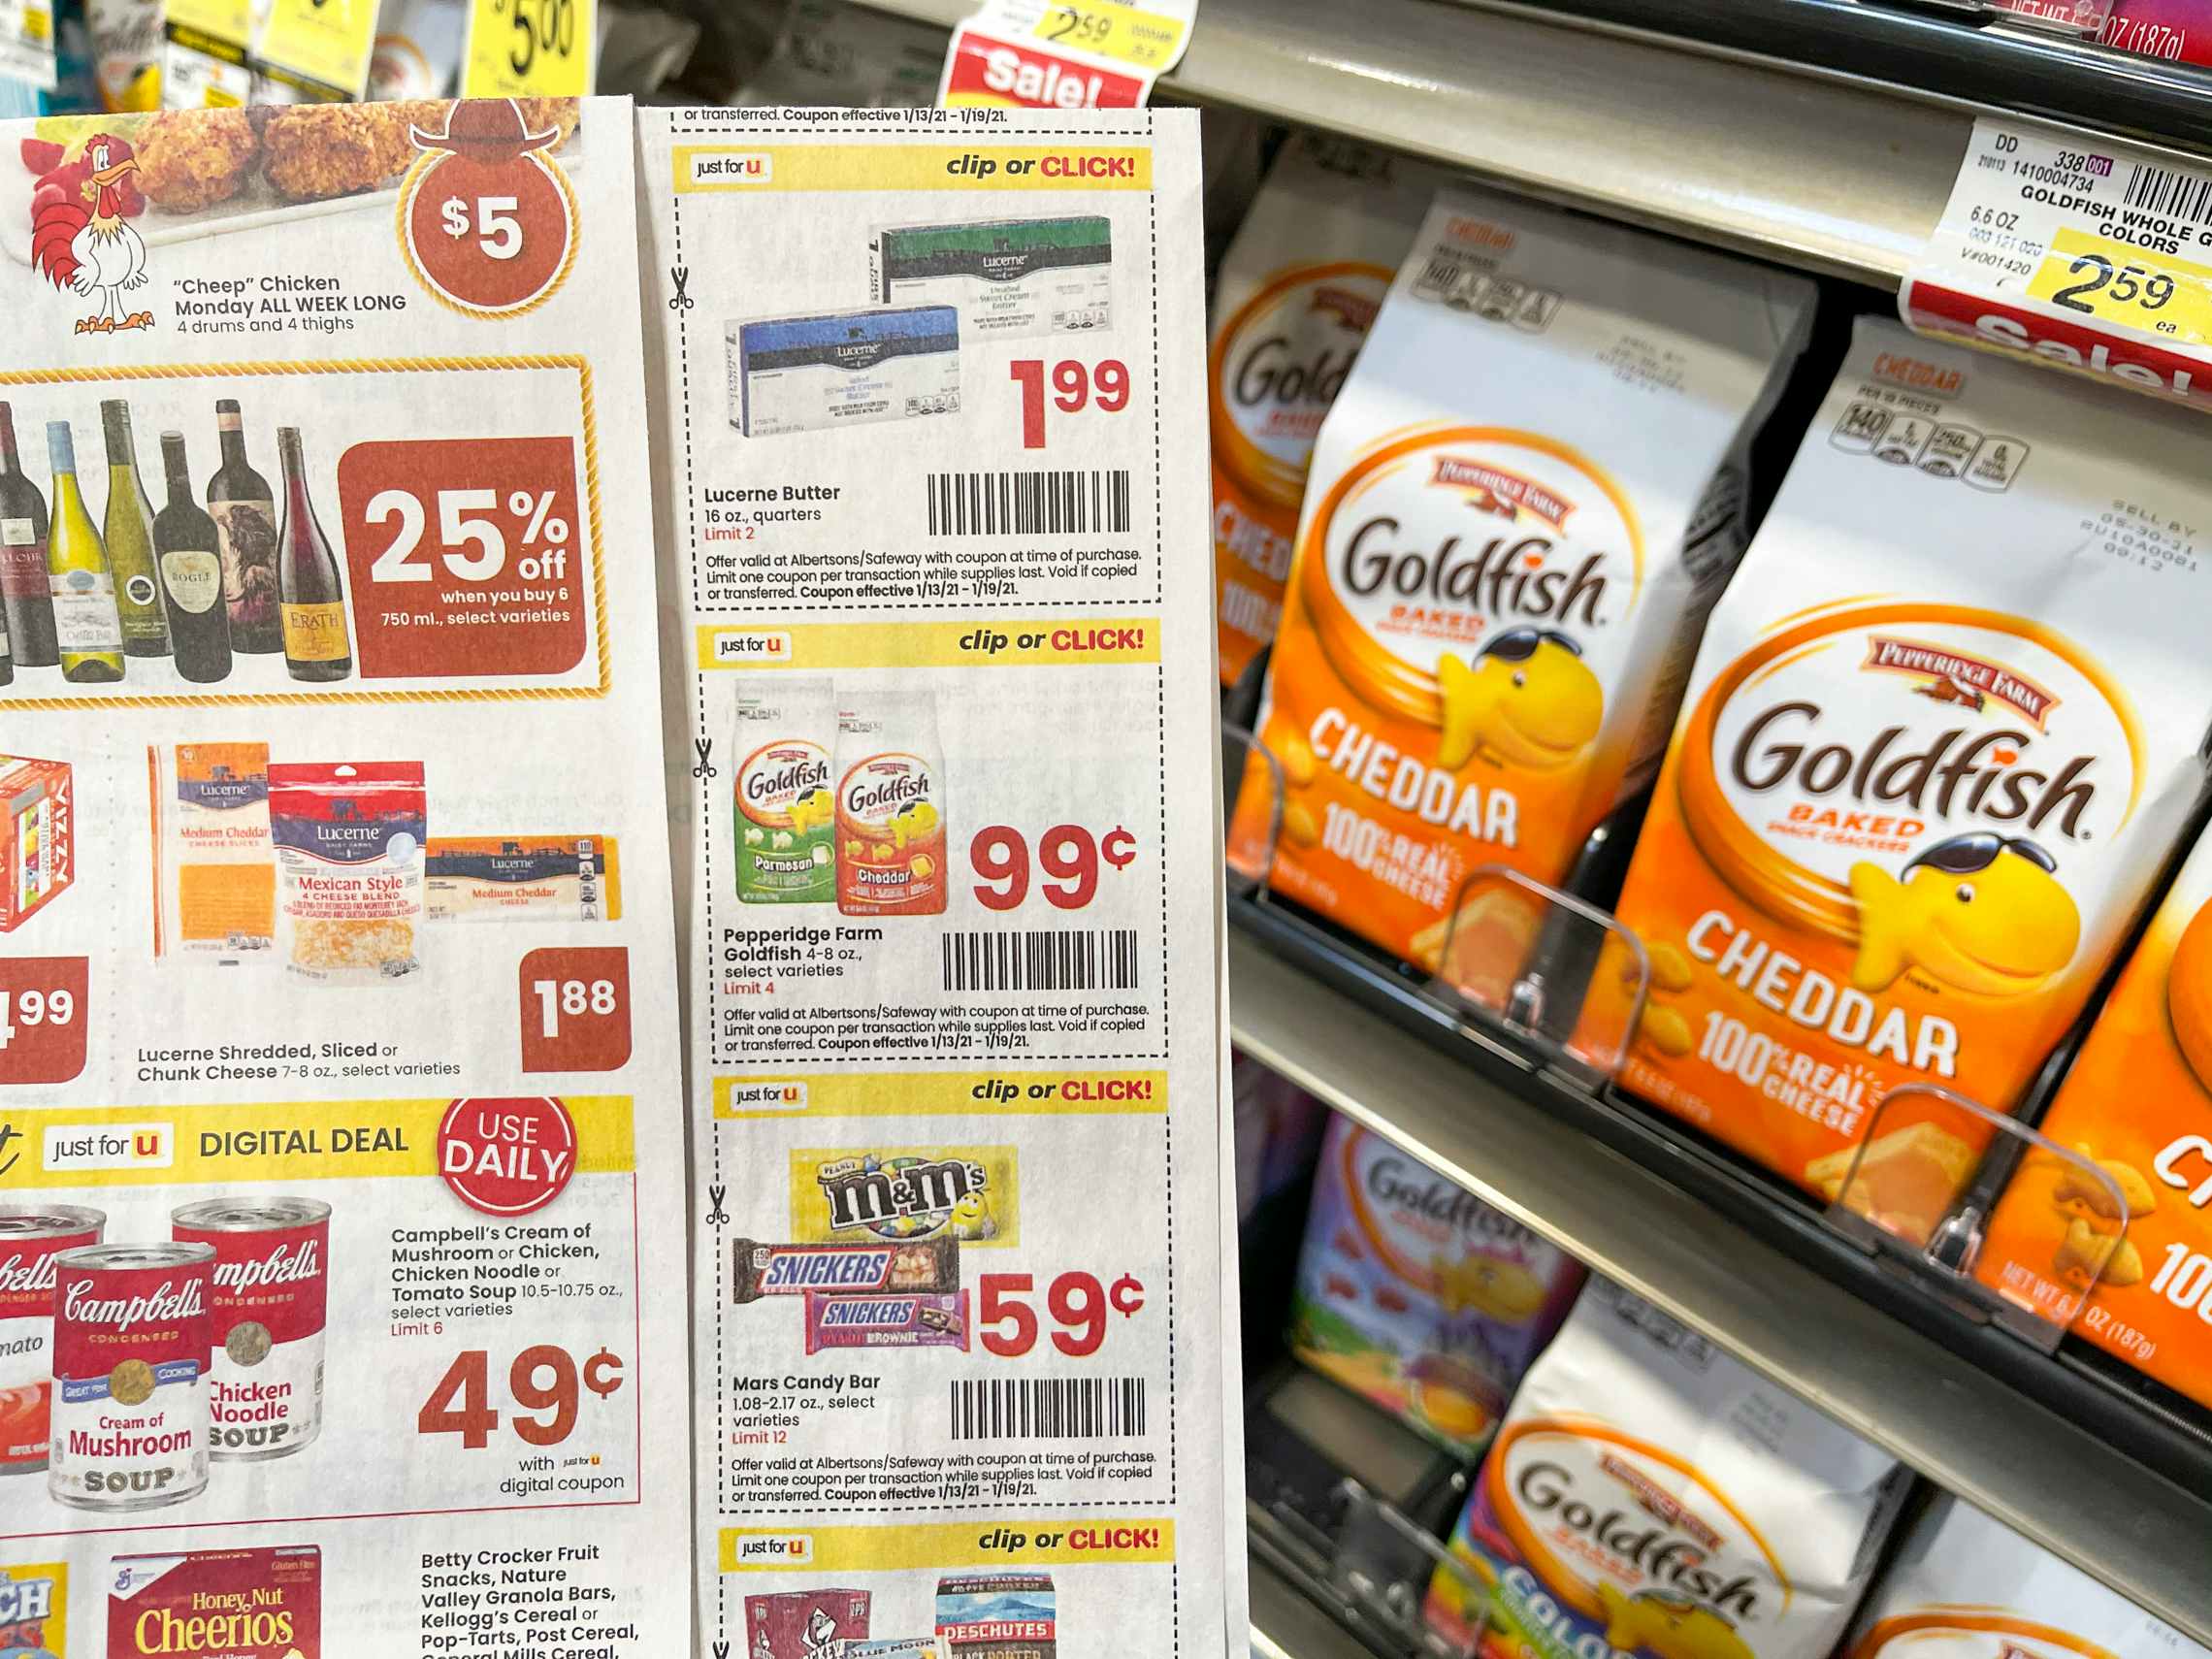 A page of coupons being held up next to a shelf with bags of Goldfish crackers.